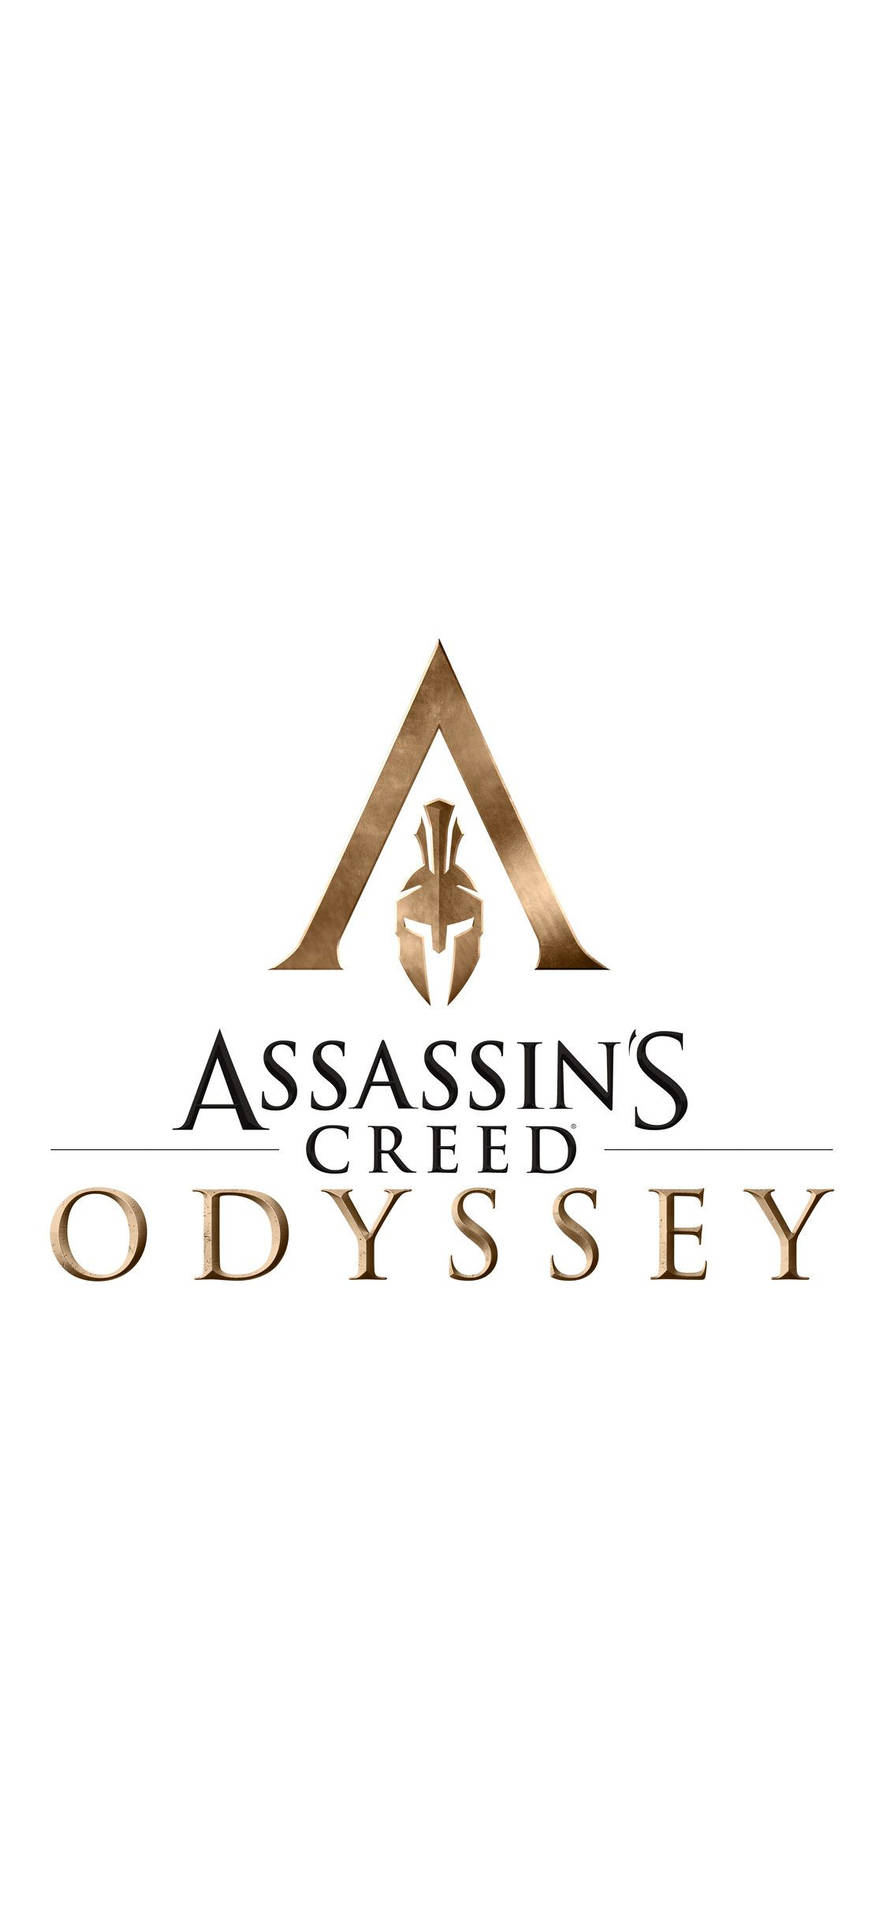 Game Logo Assassin's Creed Odyssey Iphone Background